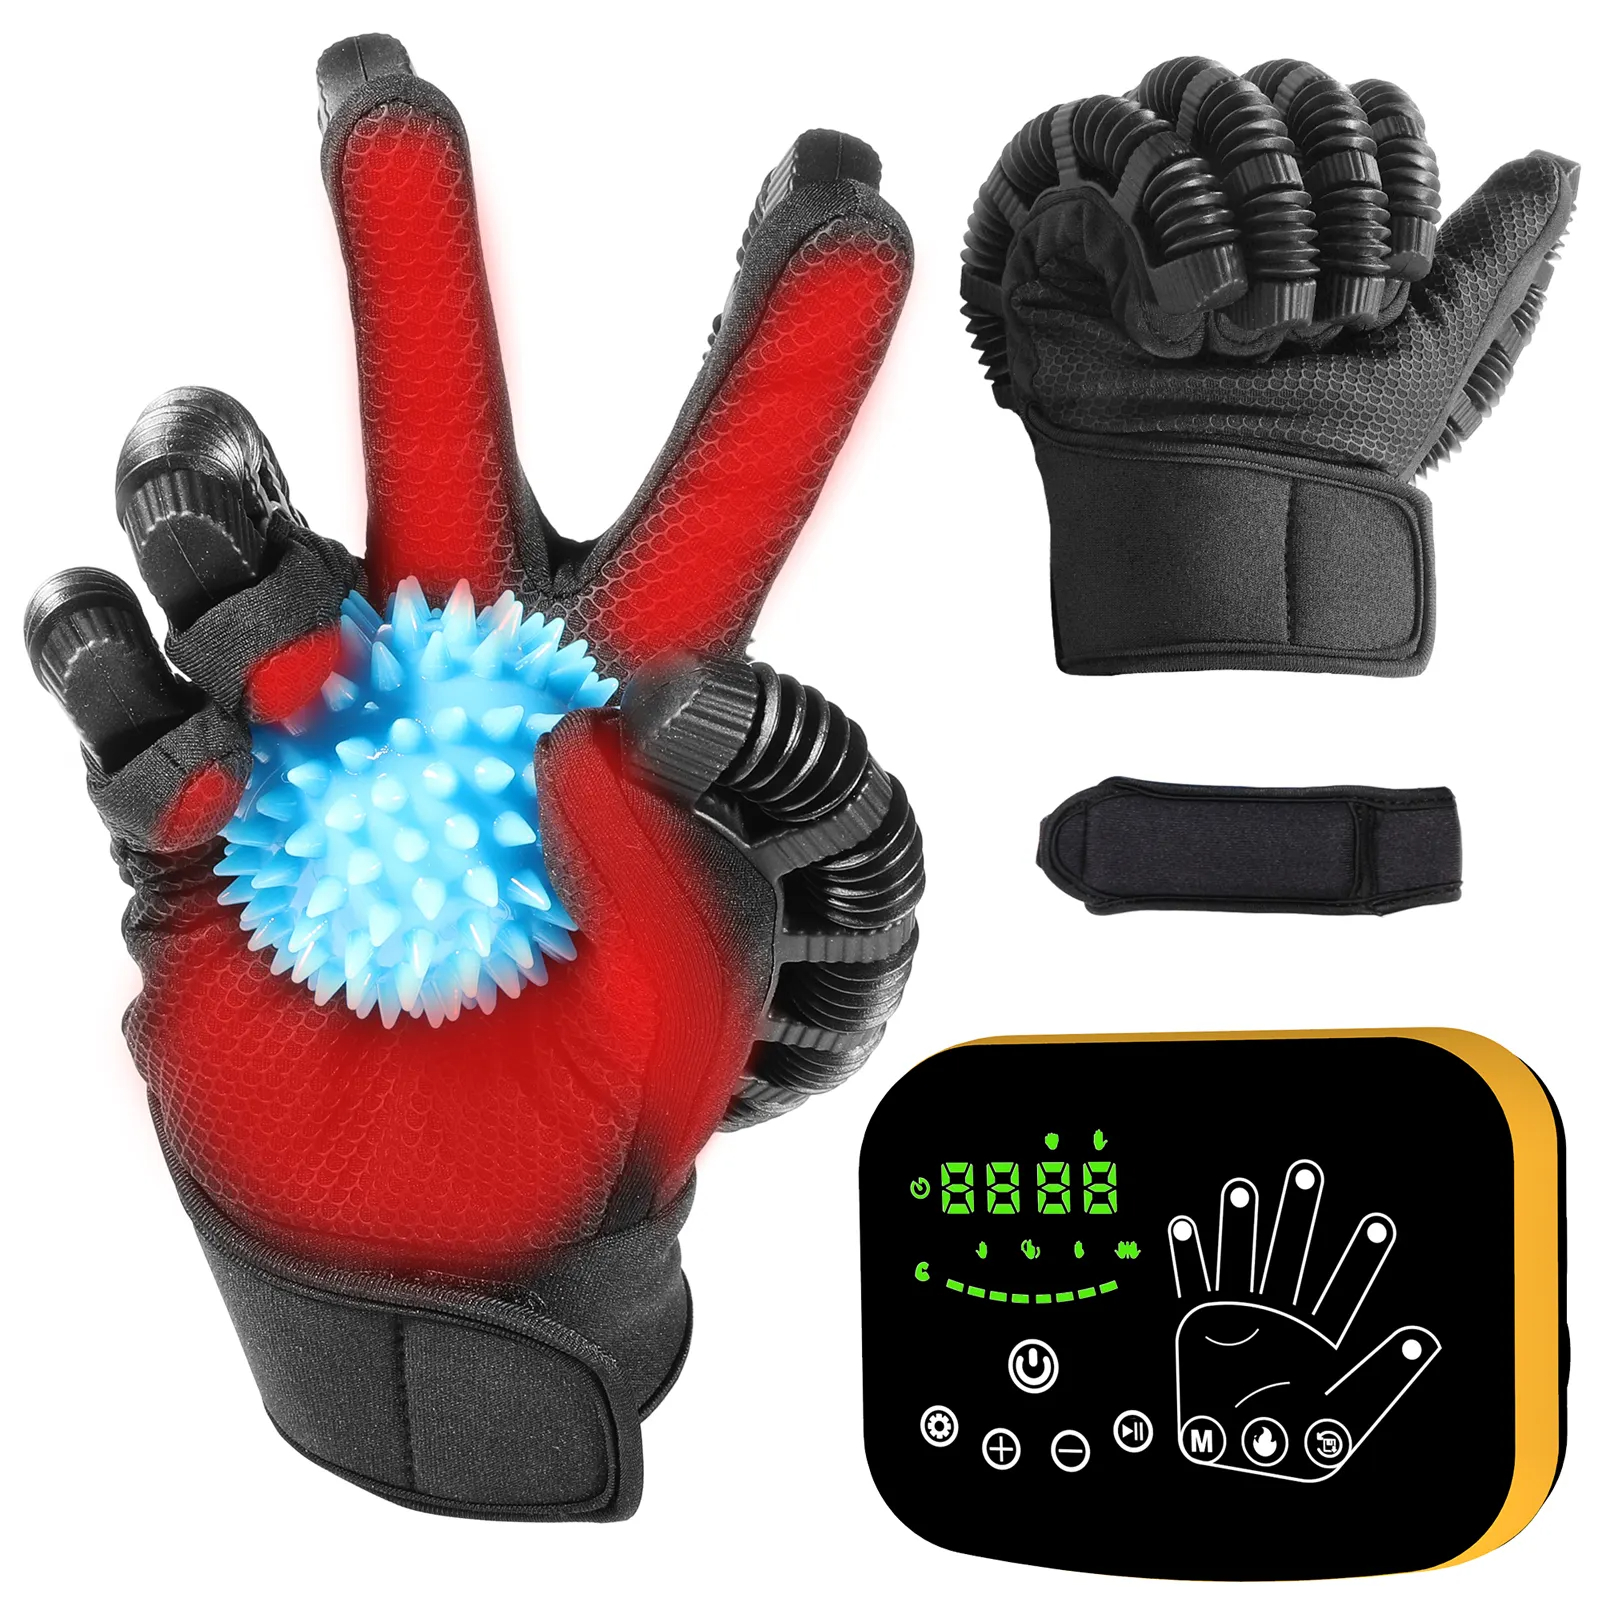 Wholesale RG-131 Heating Function Electric Hand Therapy Gloves for Stroke Patients